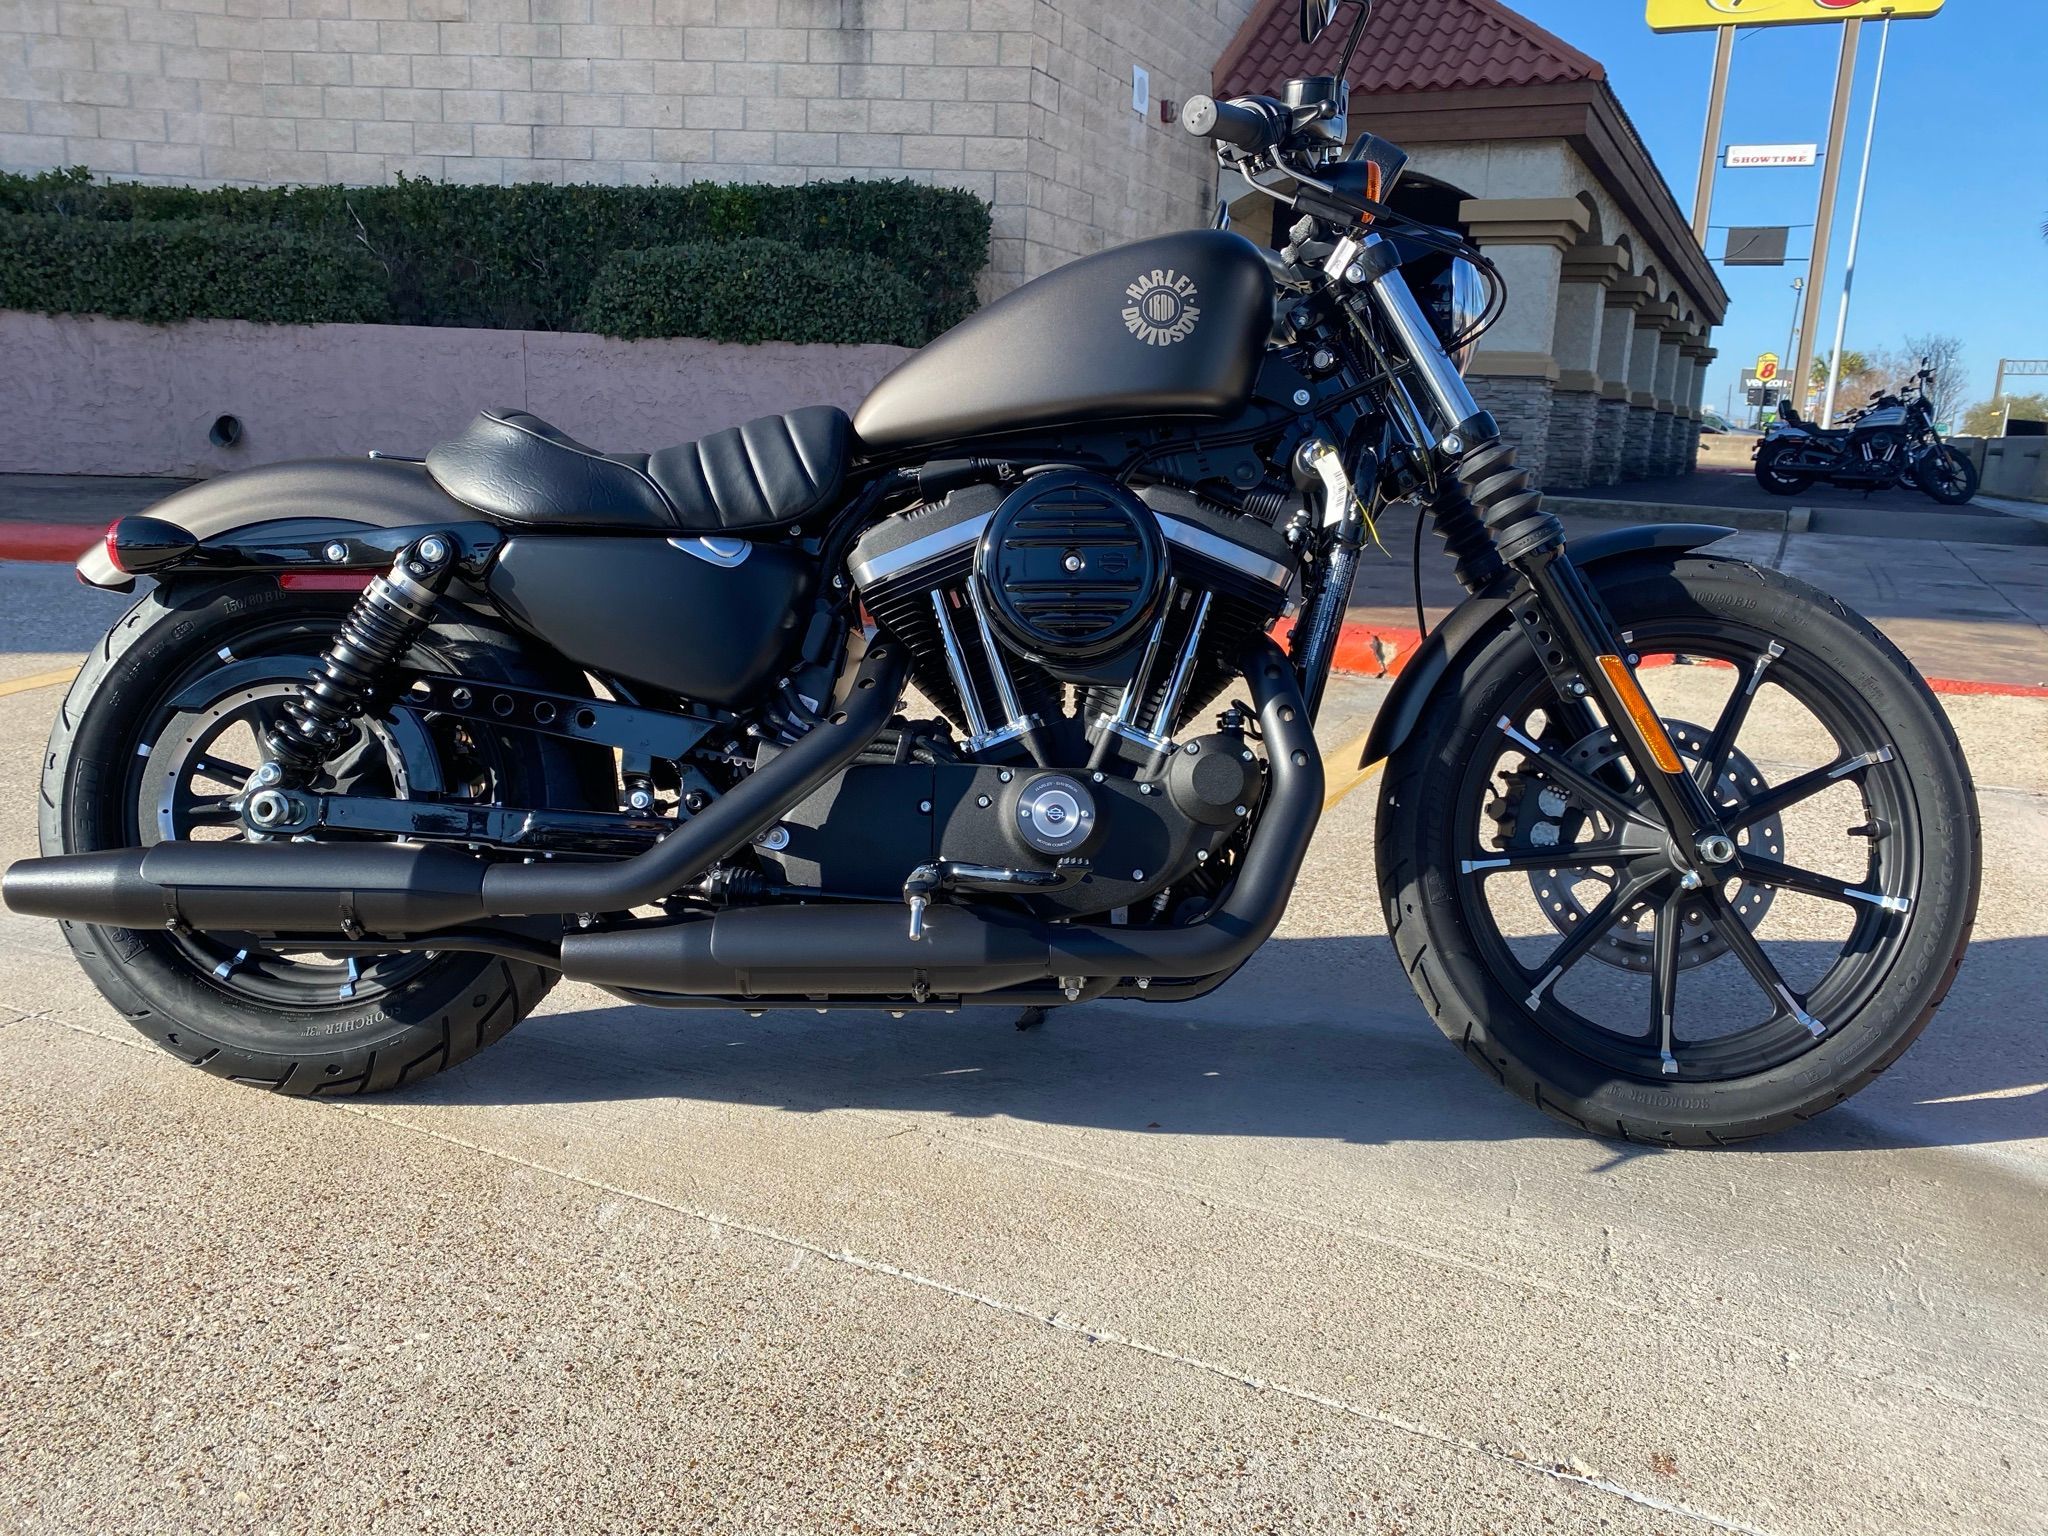 Black 2021 Harley-Davidson Iron 883 in front of building; side view